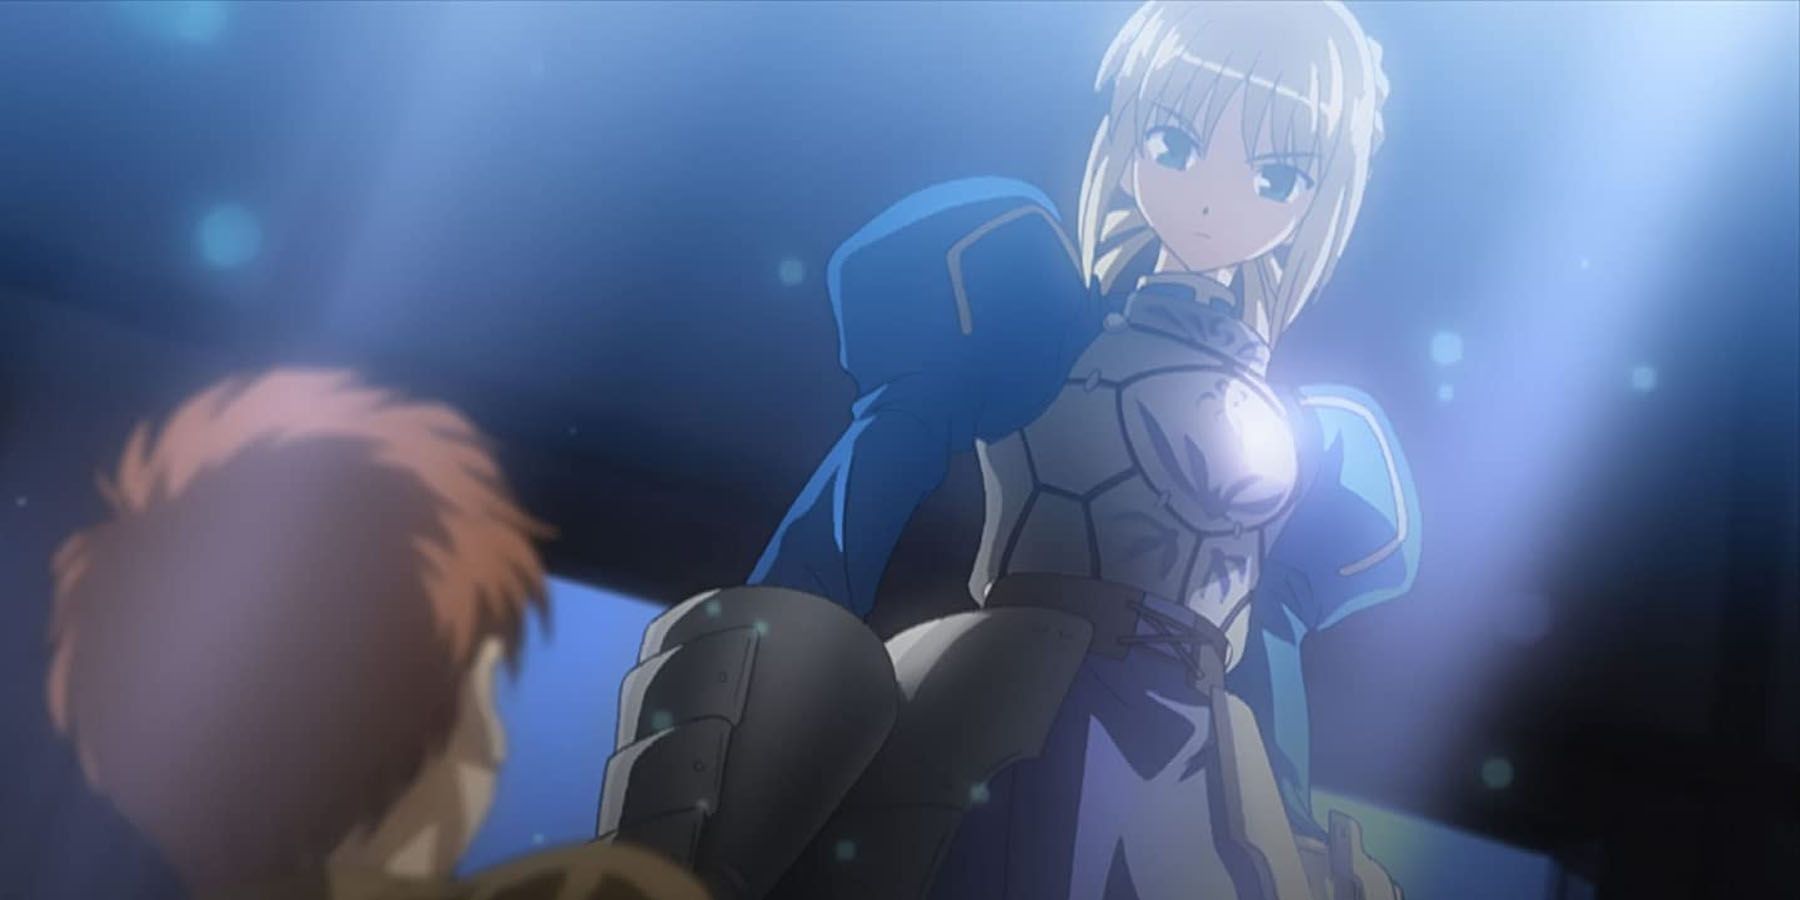 Saber meeting Shiro in Fate Stay Night